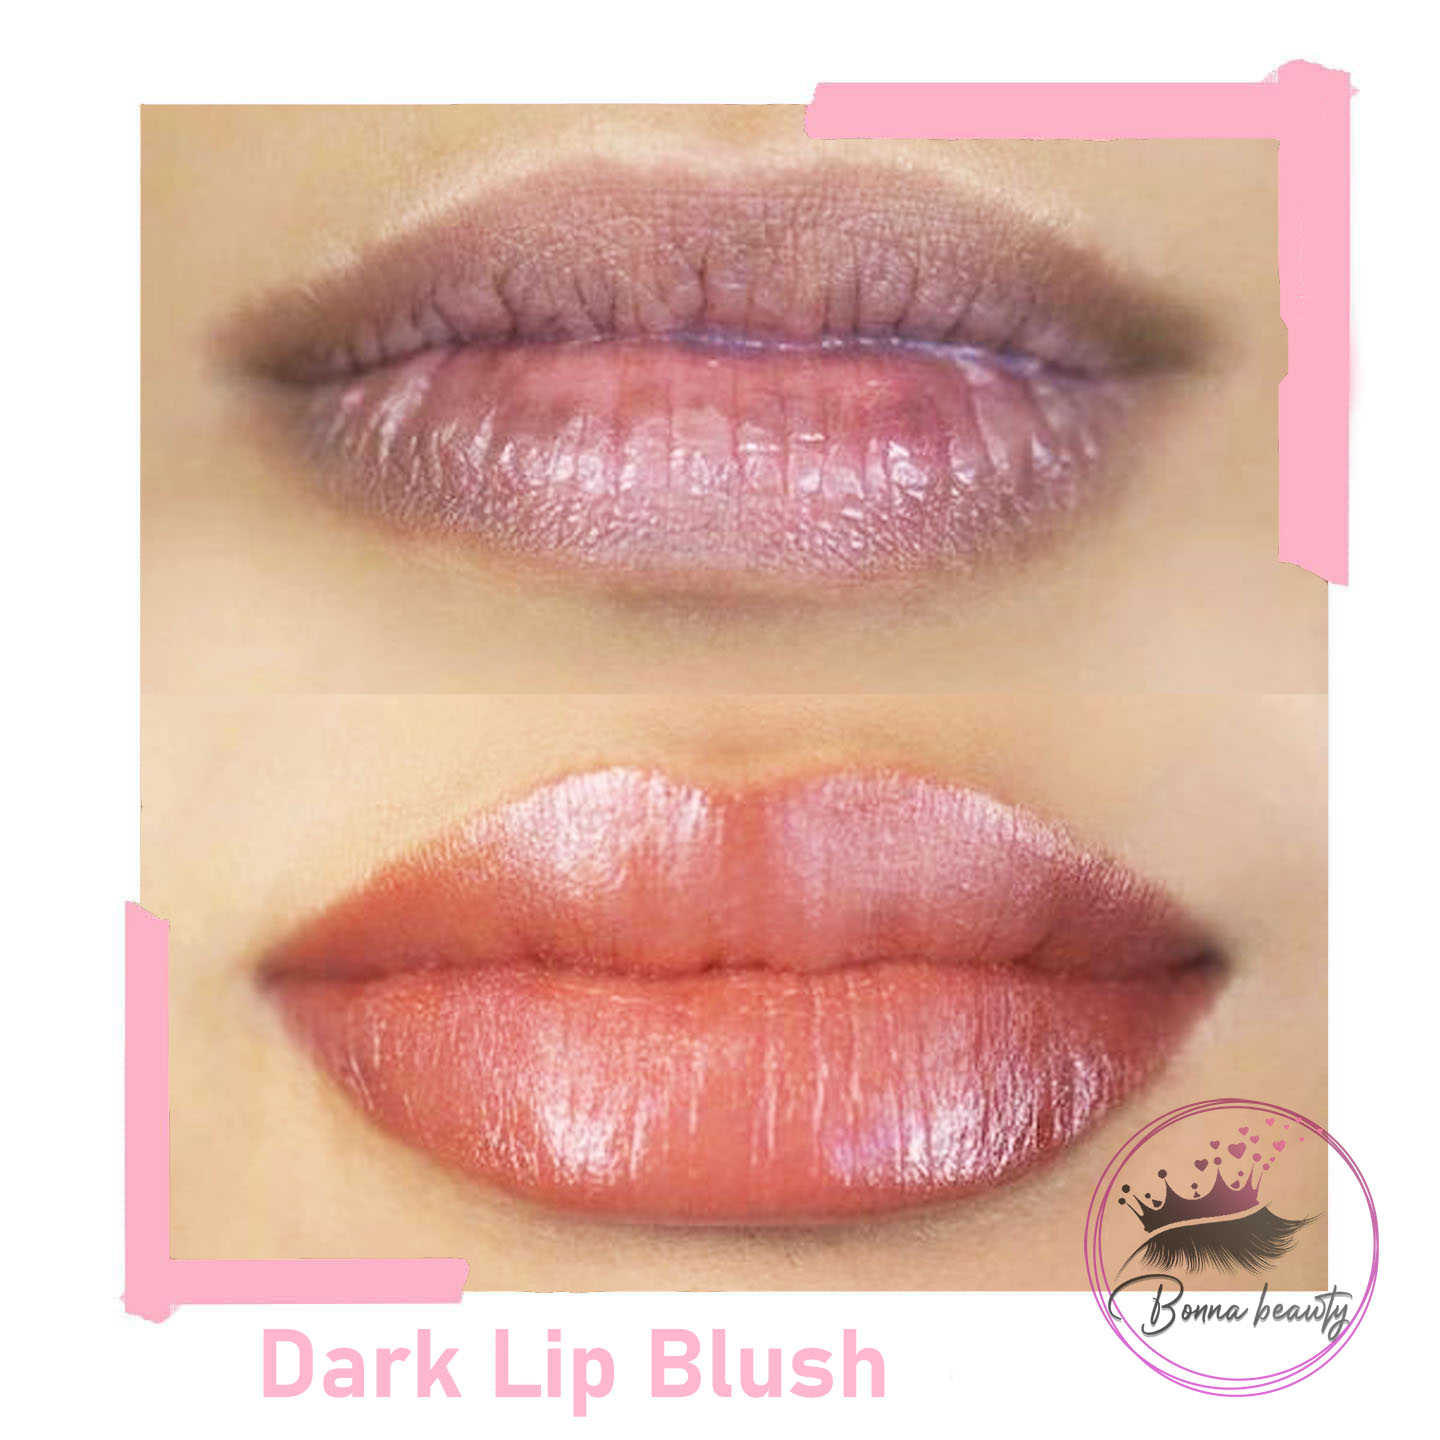 How to neutralize dark lips colours? How much dose it cost?